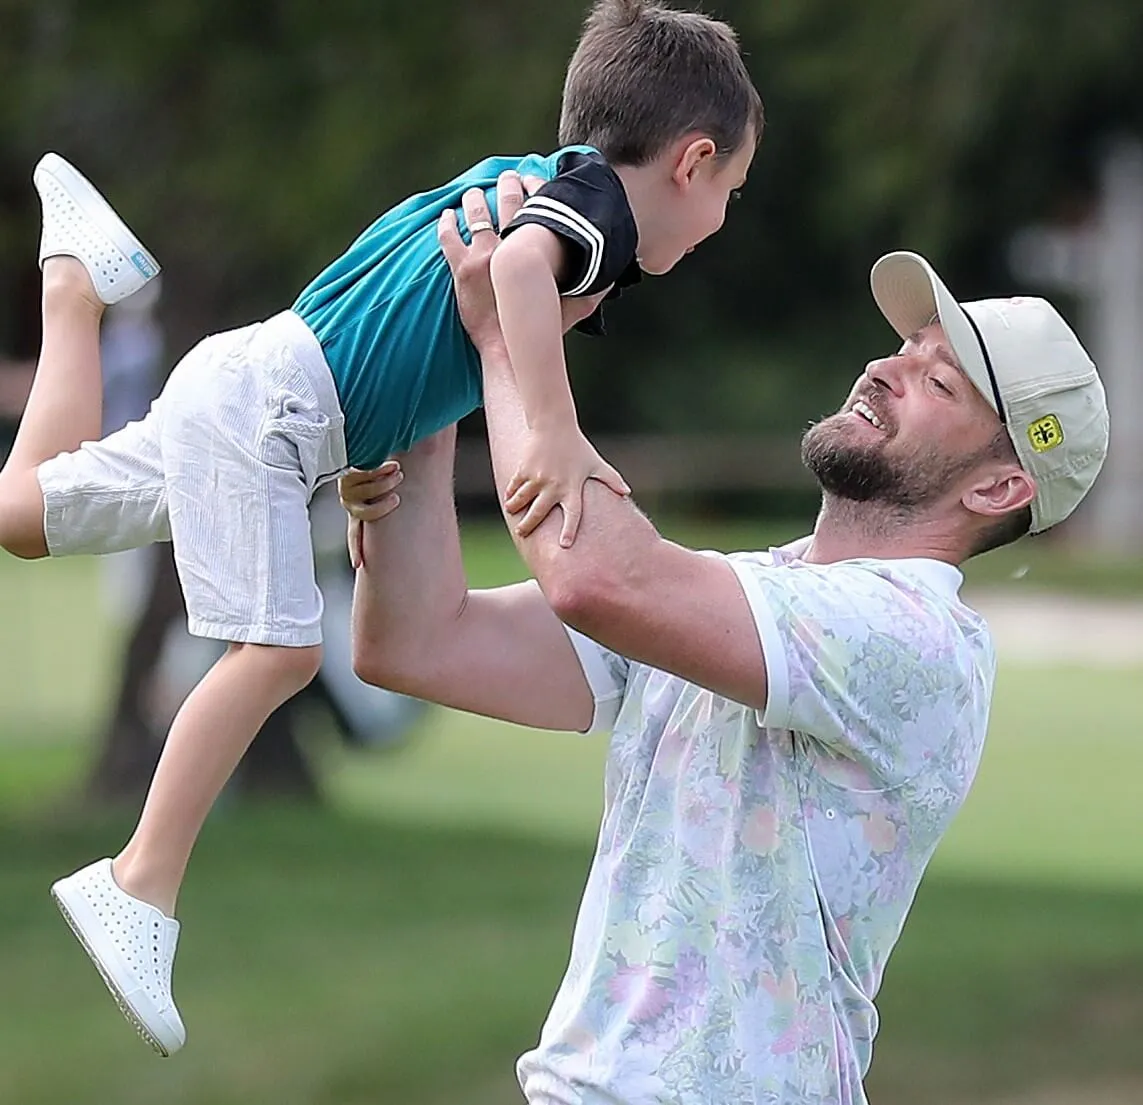 "Can't Stop the Feeling!" star Justin Timberlake holding his son, Silas